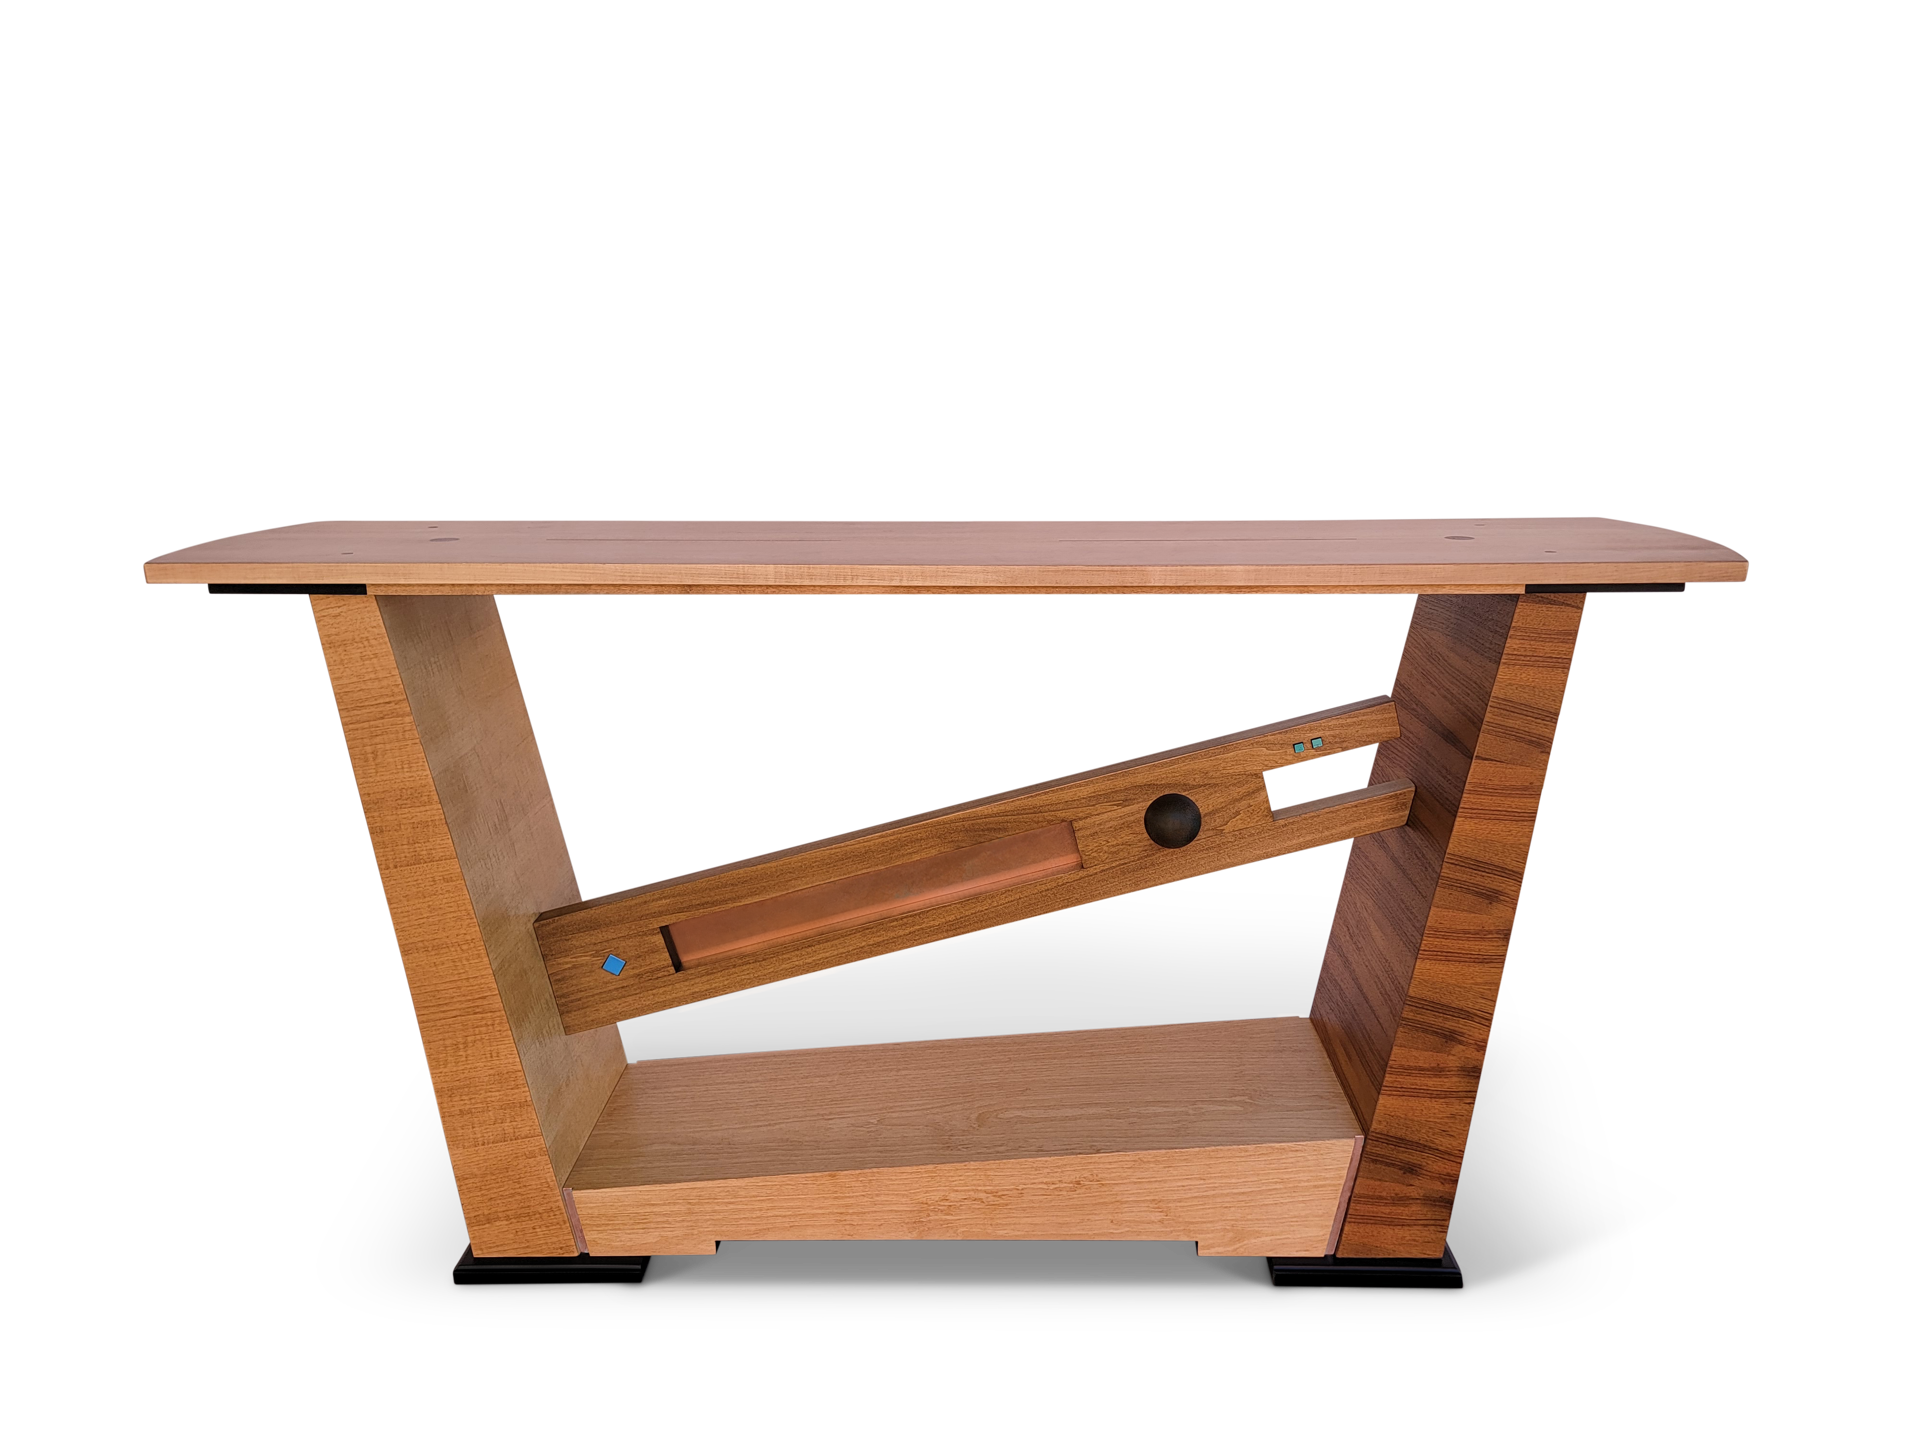 Angled Teak and Maple Table by Joseph Nikrasch